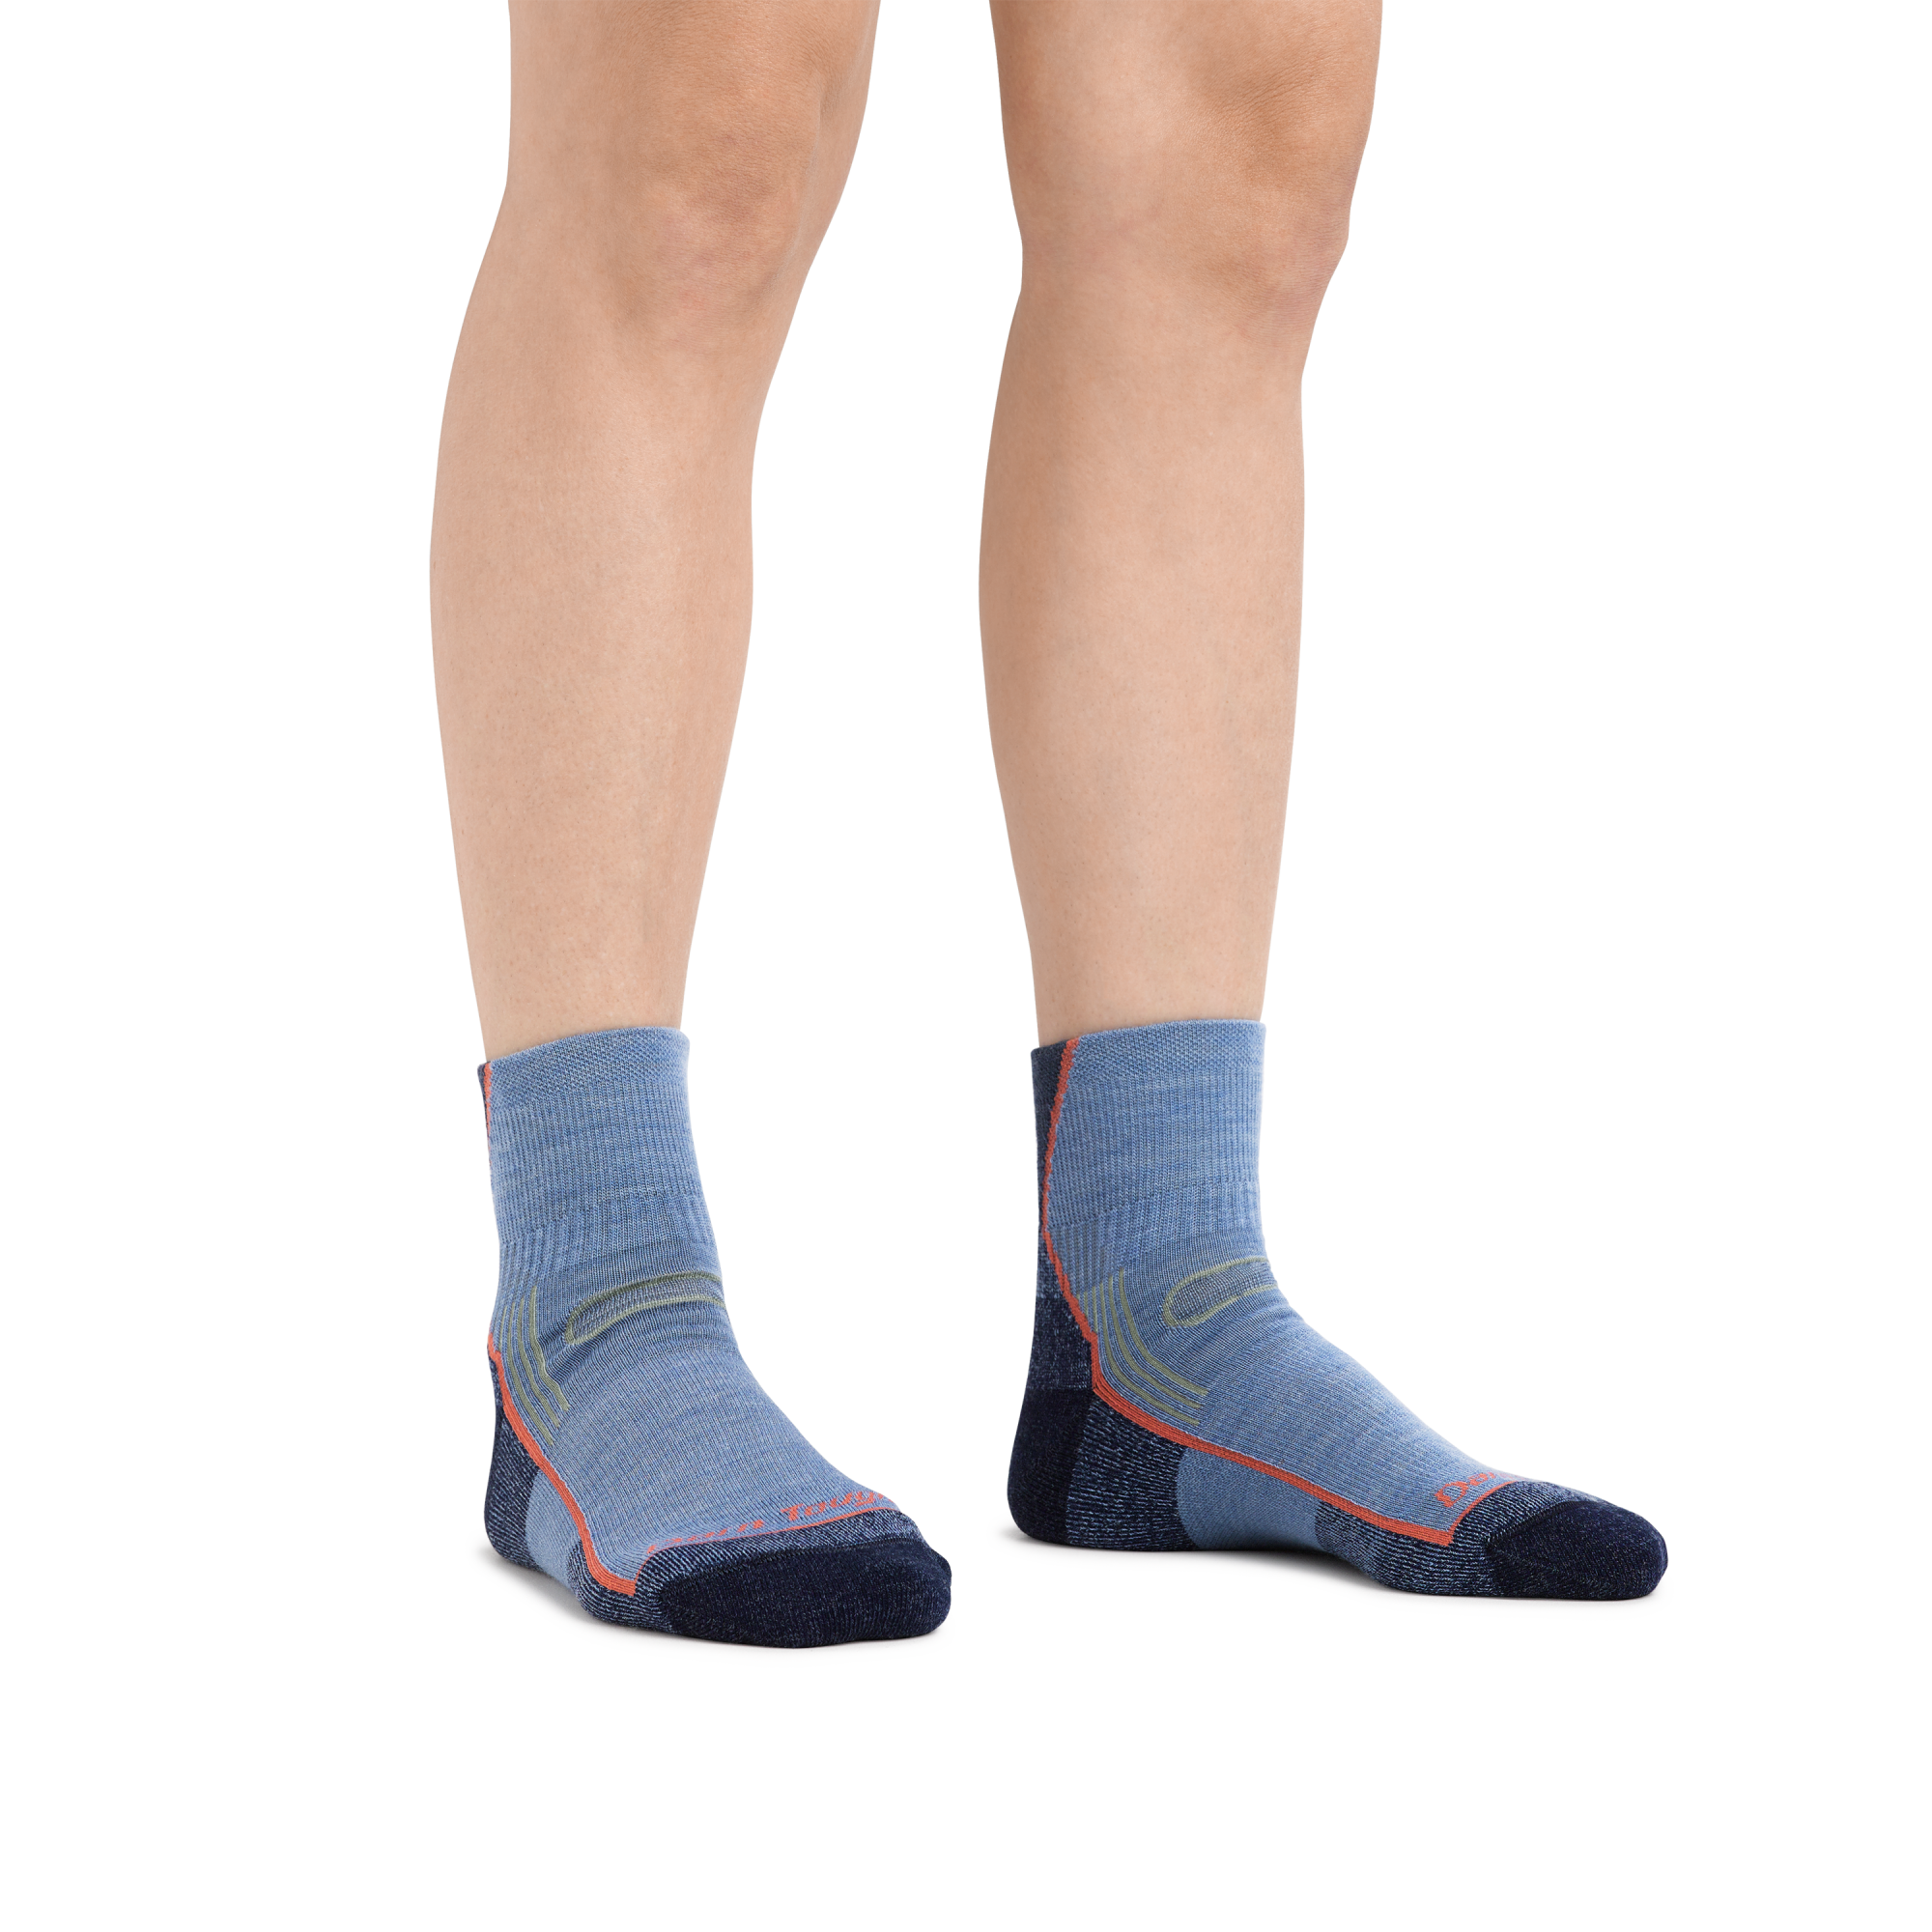 Woman's legs standing on a white background wearing Women's Hiker Quarter Midweight Hiking Socks in Denim Heather